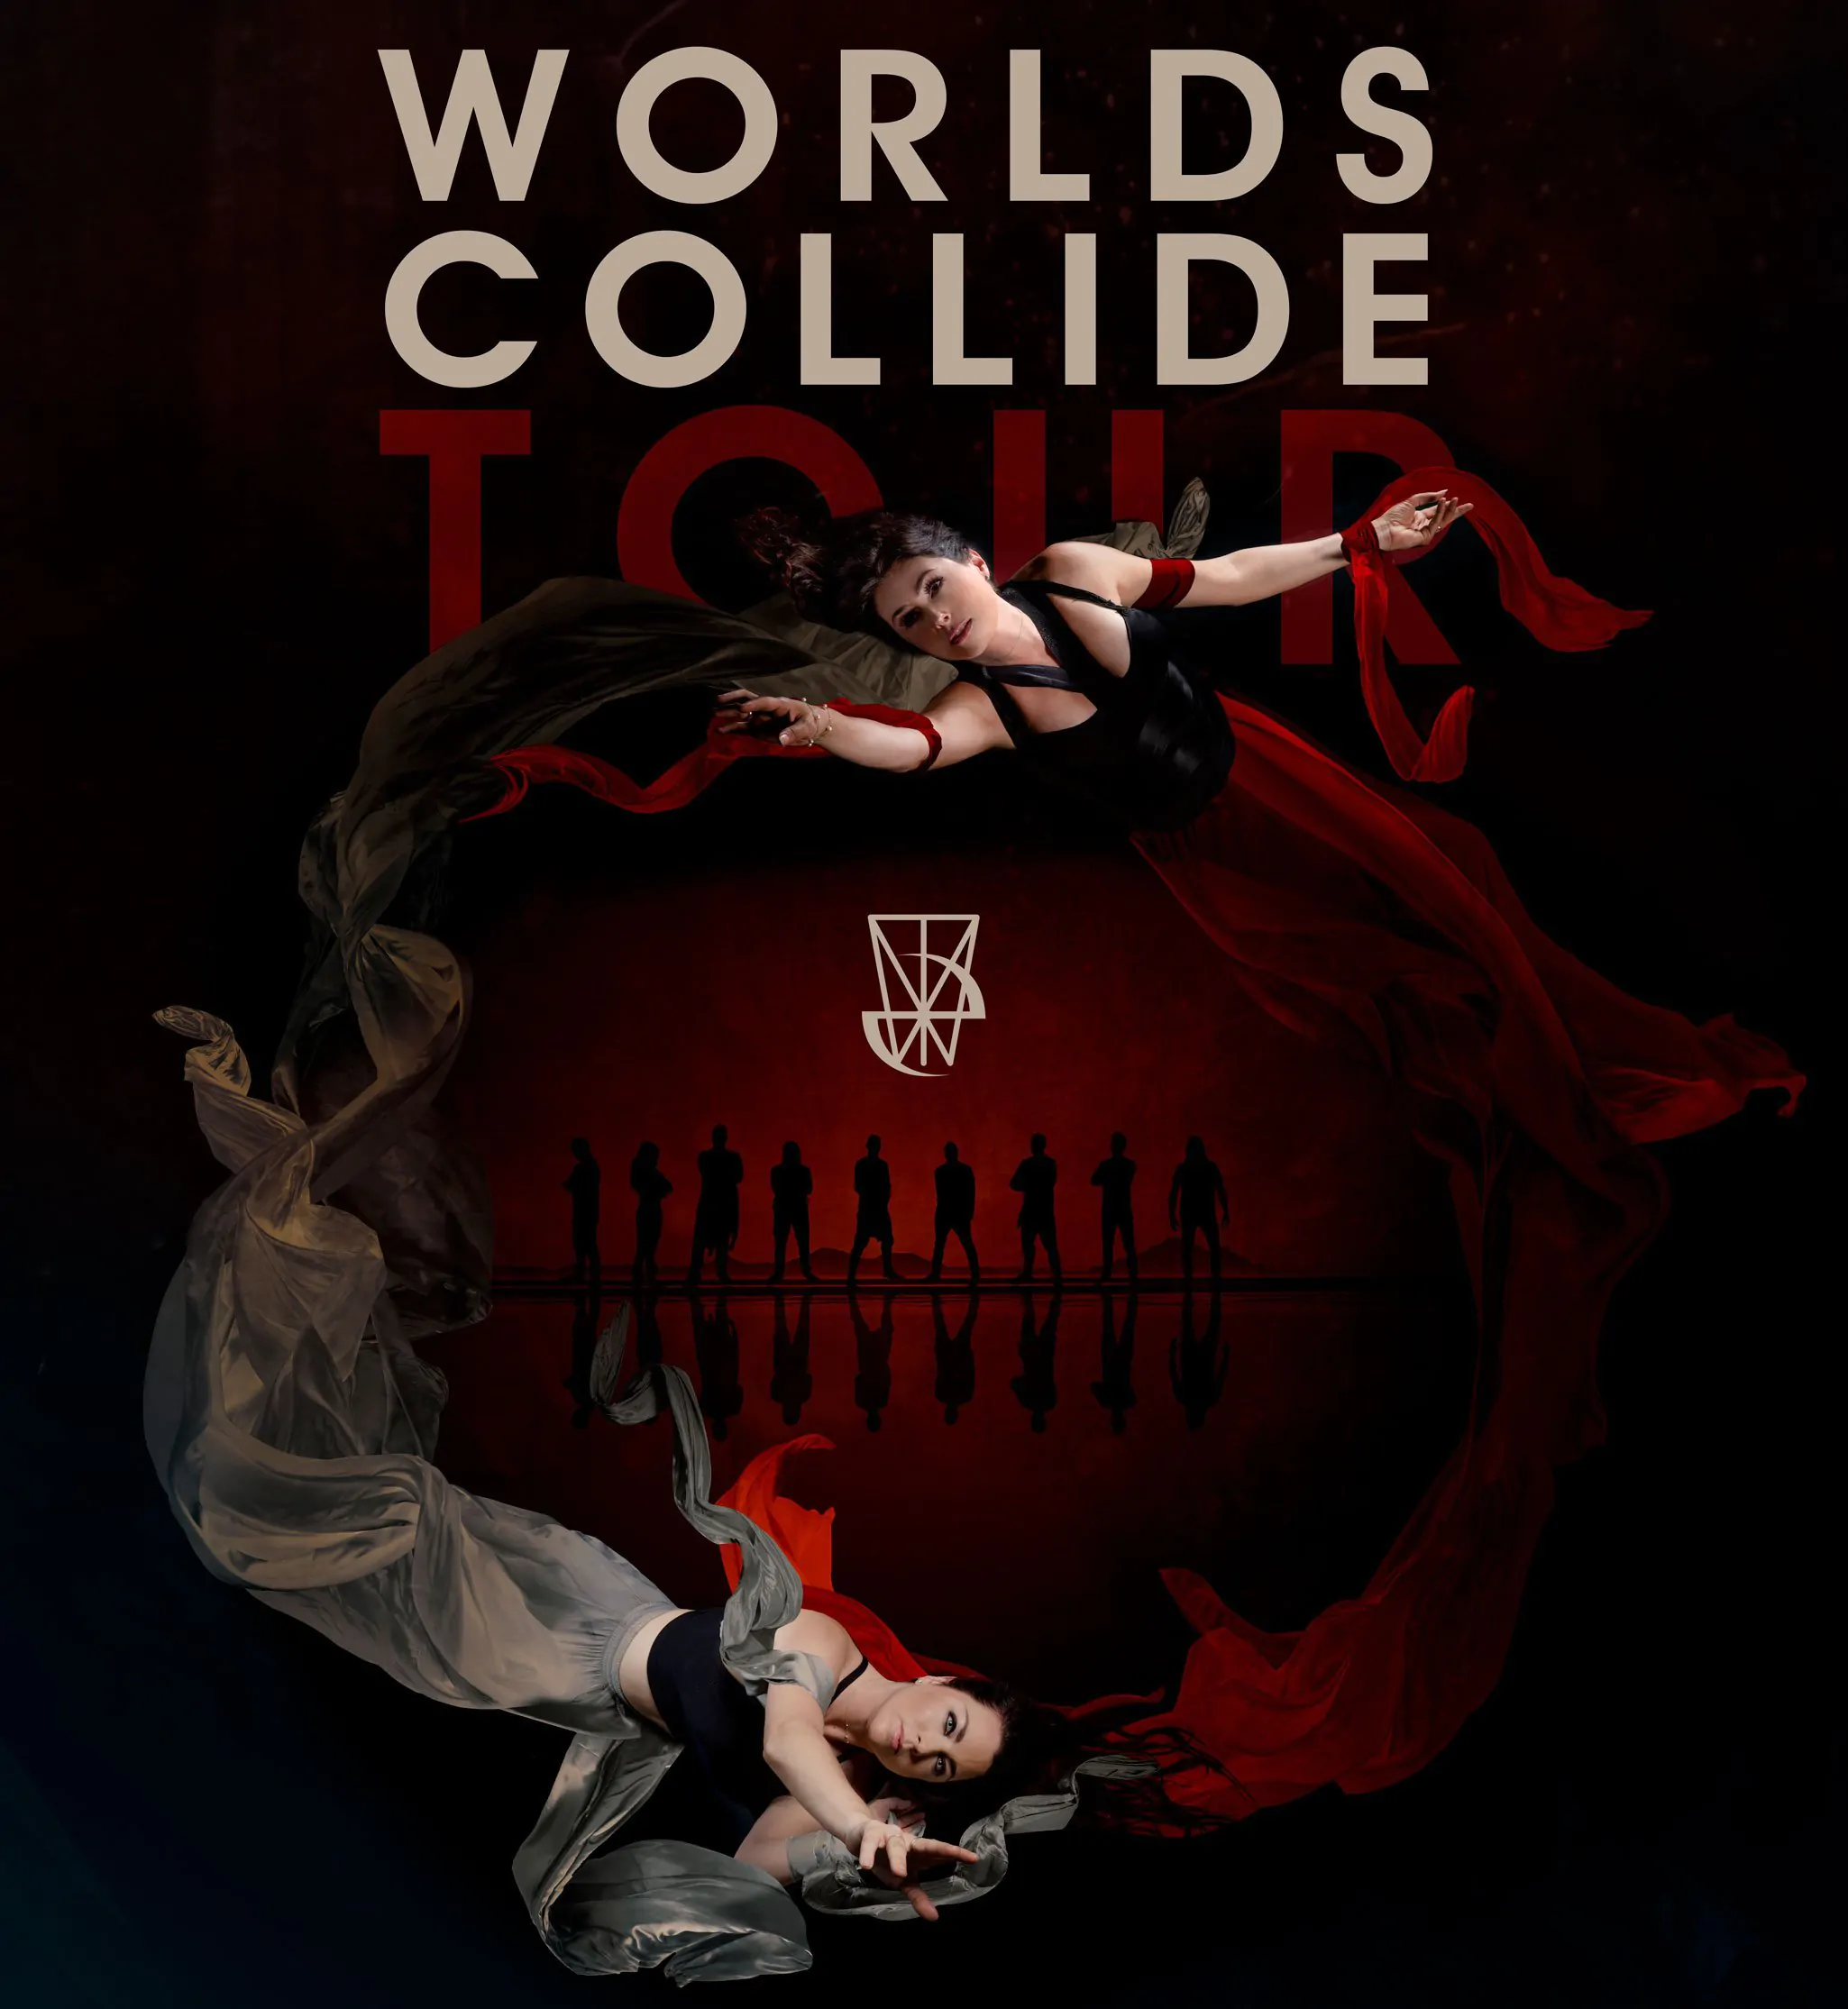 EVANESCENCE & WITHIN TEMPTATION have joined forces for WORLDS COLLIDE, a massive co-headline European tour